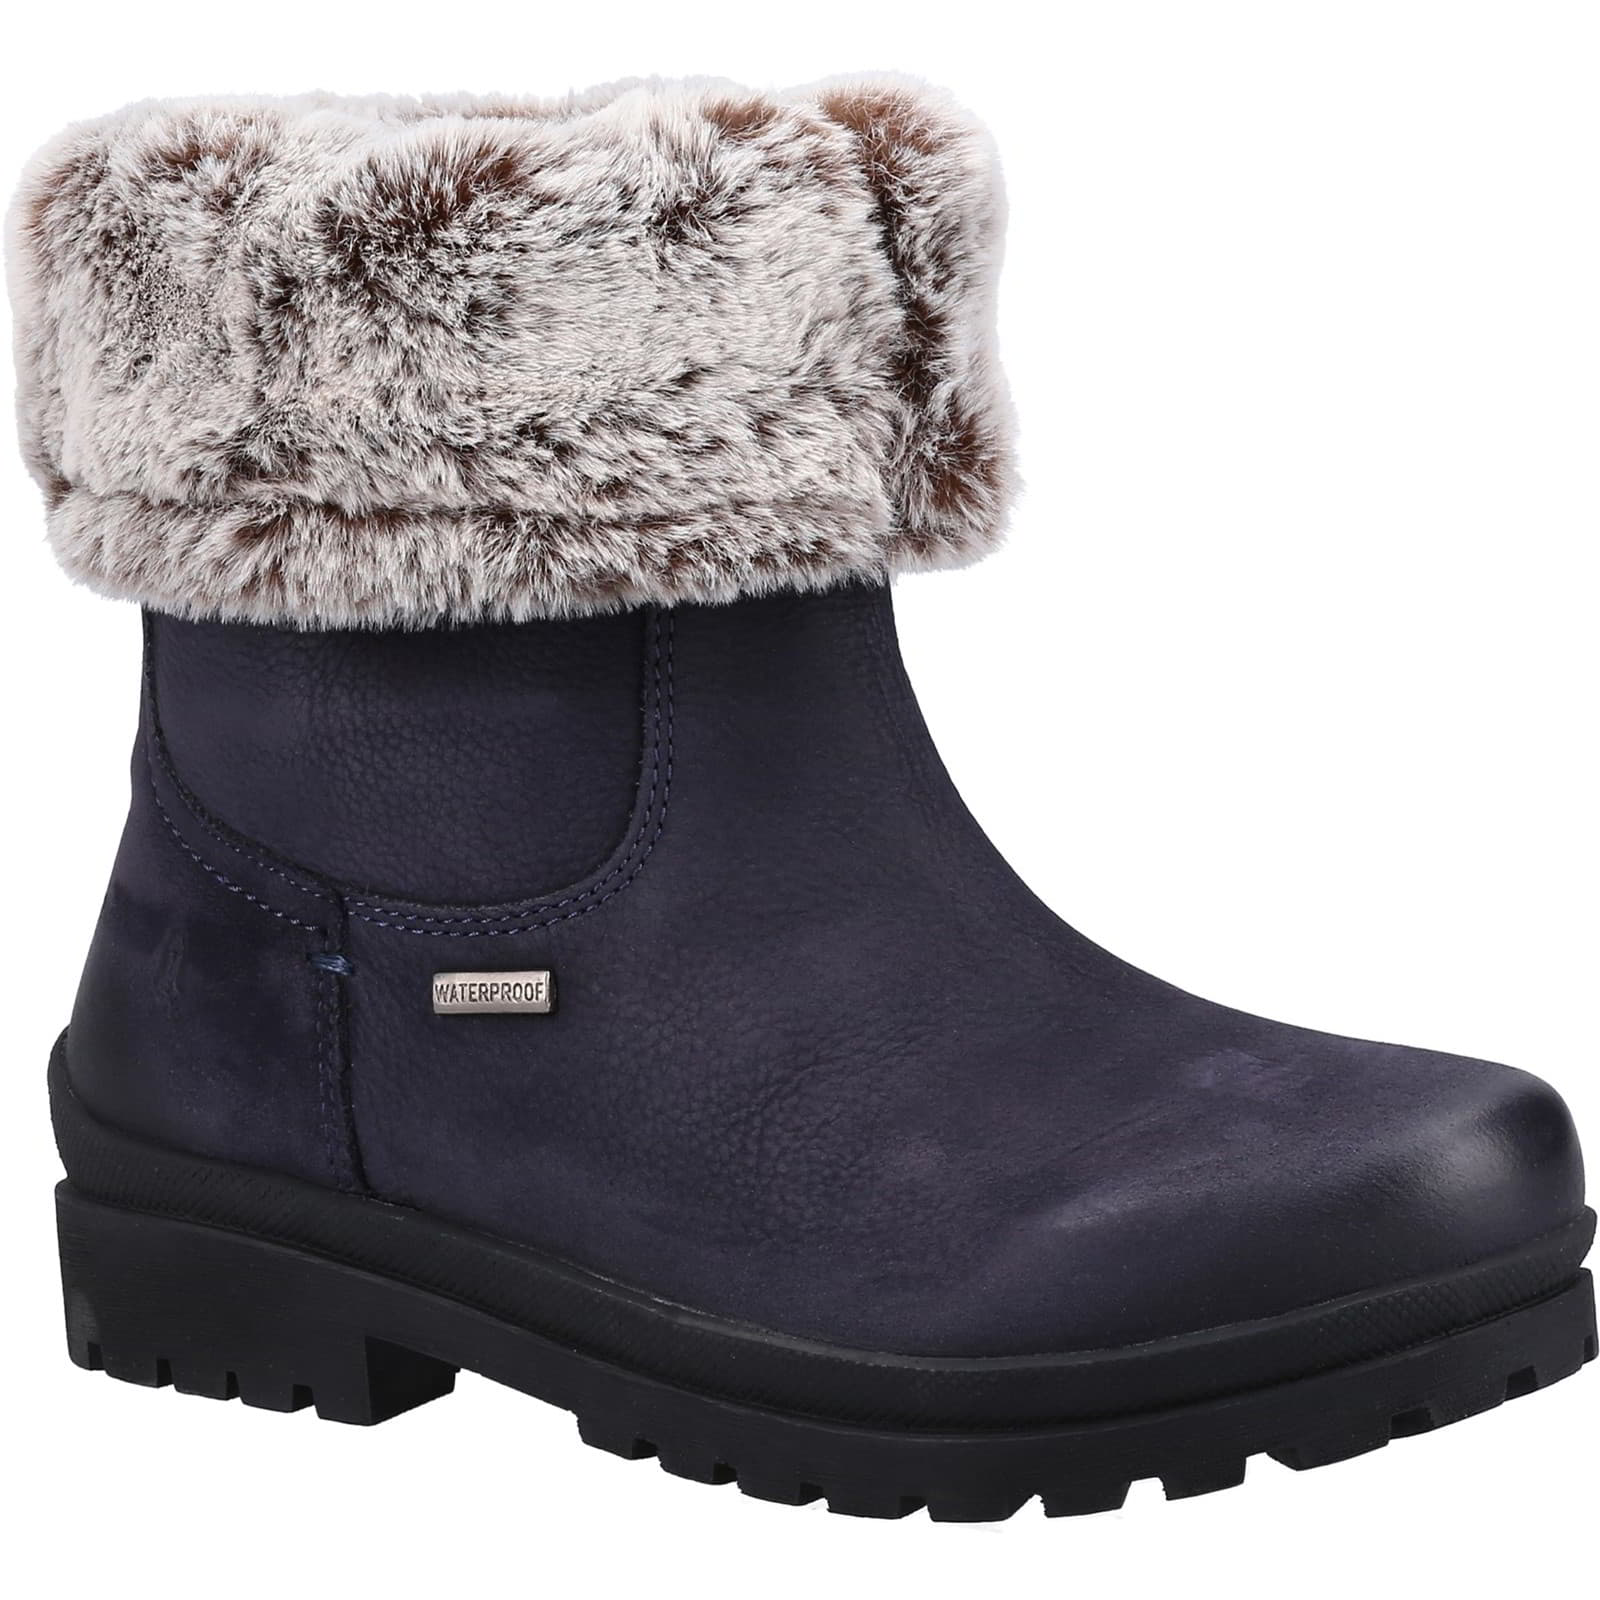 Hush Puppies Women's Alice Pull On Warm Lined Waterproof Boots - UK 4